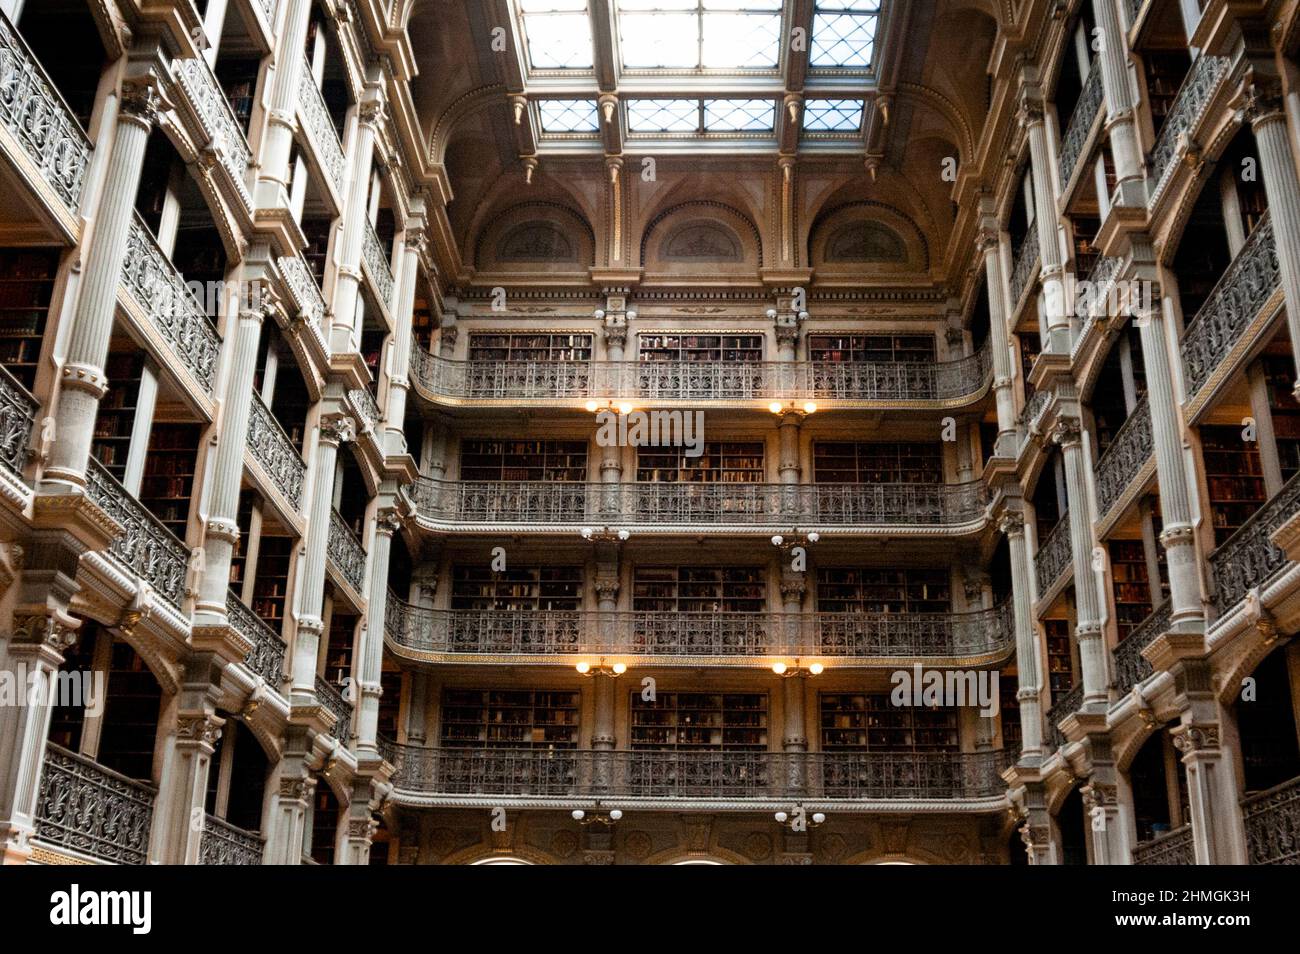 Die George Peabody Library in Baltimore, Maryland. Stockfoto